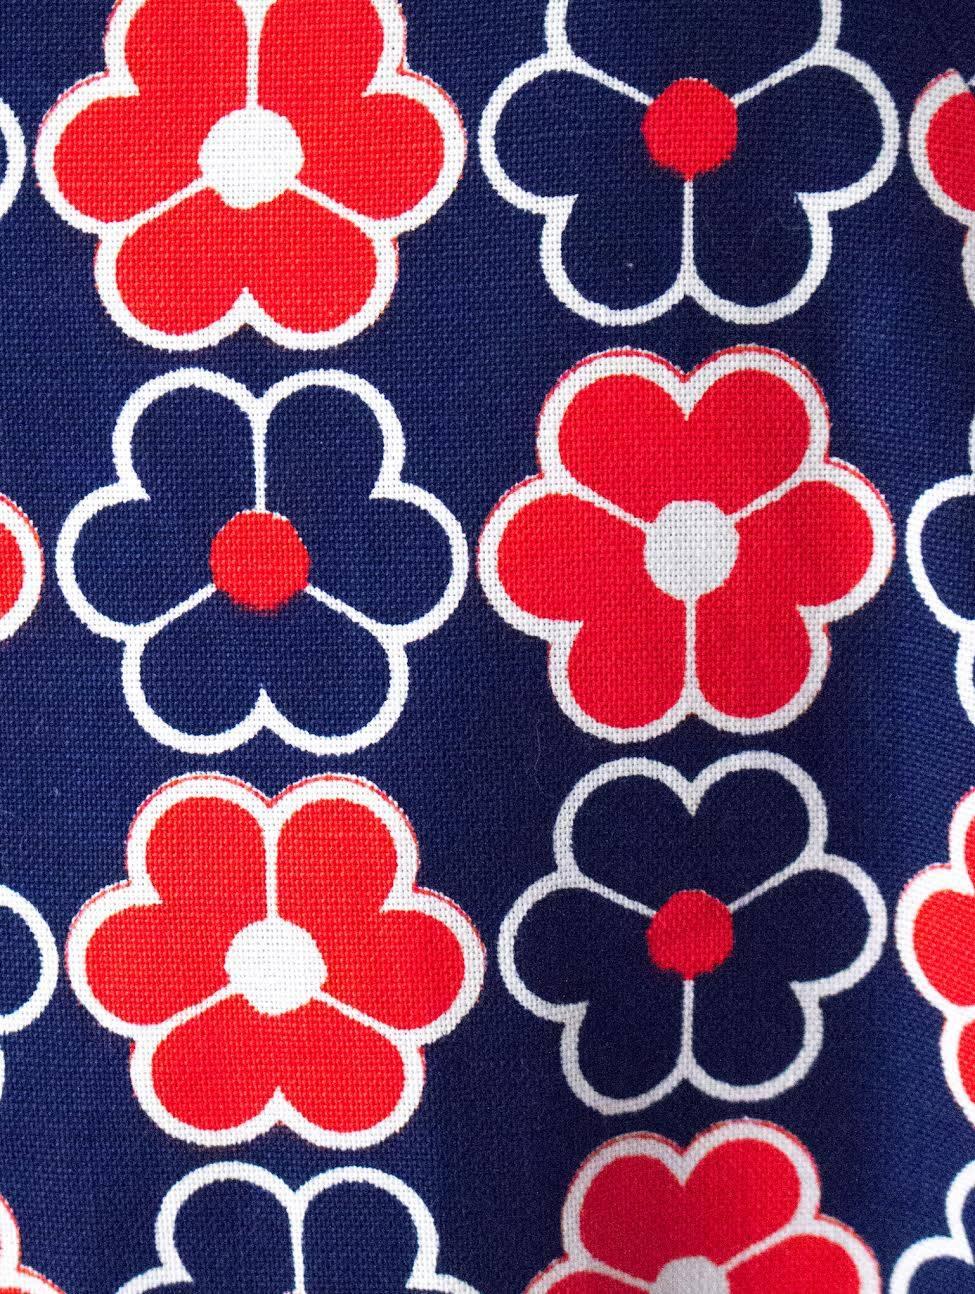 60s mod red white blue